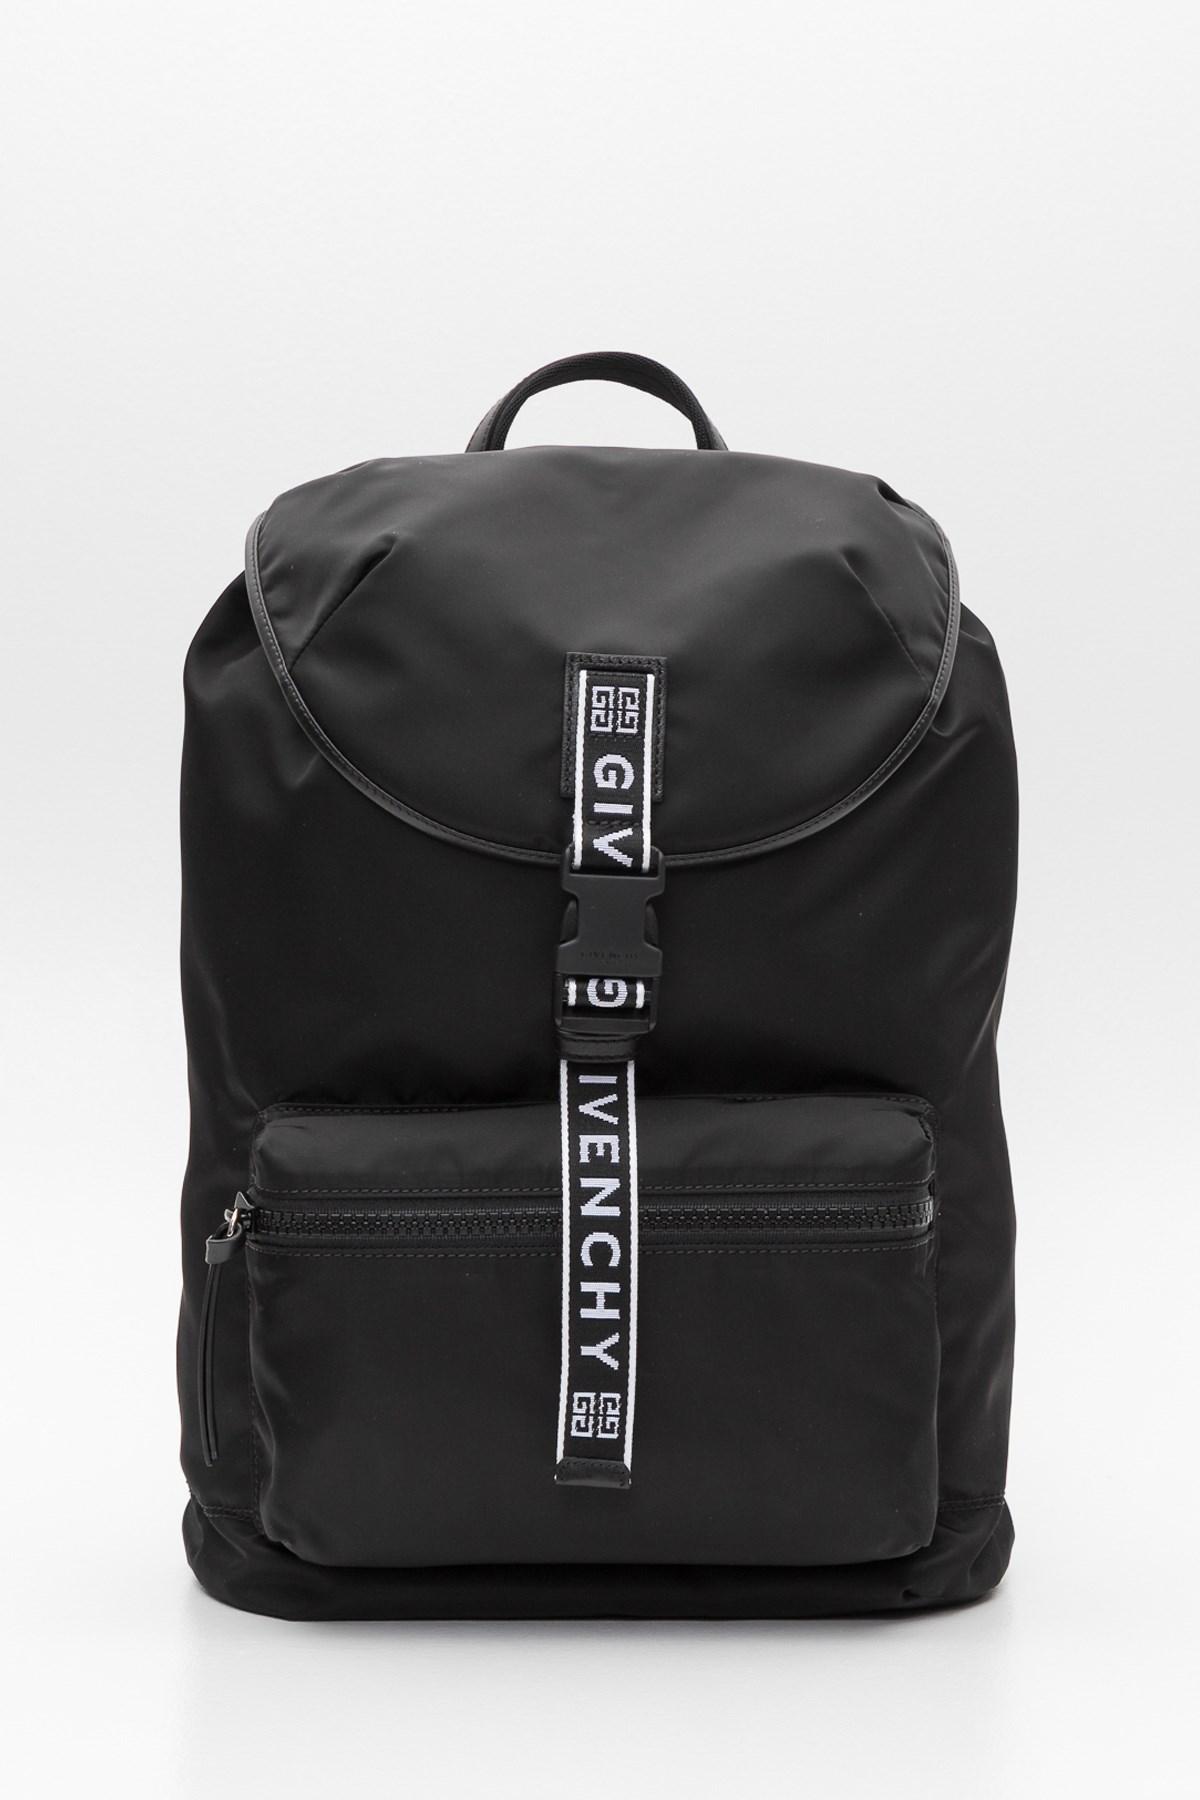 Givenchy Synthetic Light 3 Leather-trimmed Nylon Backpack in Black 